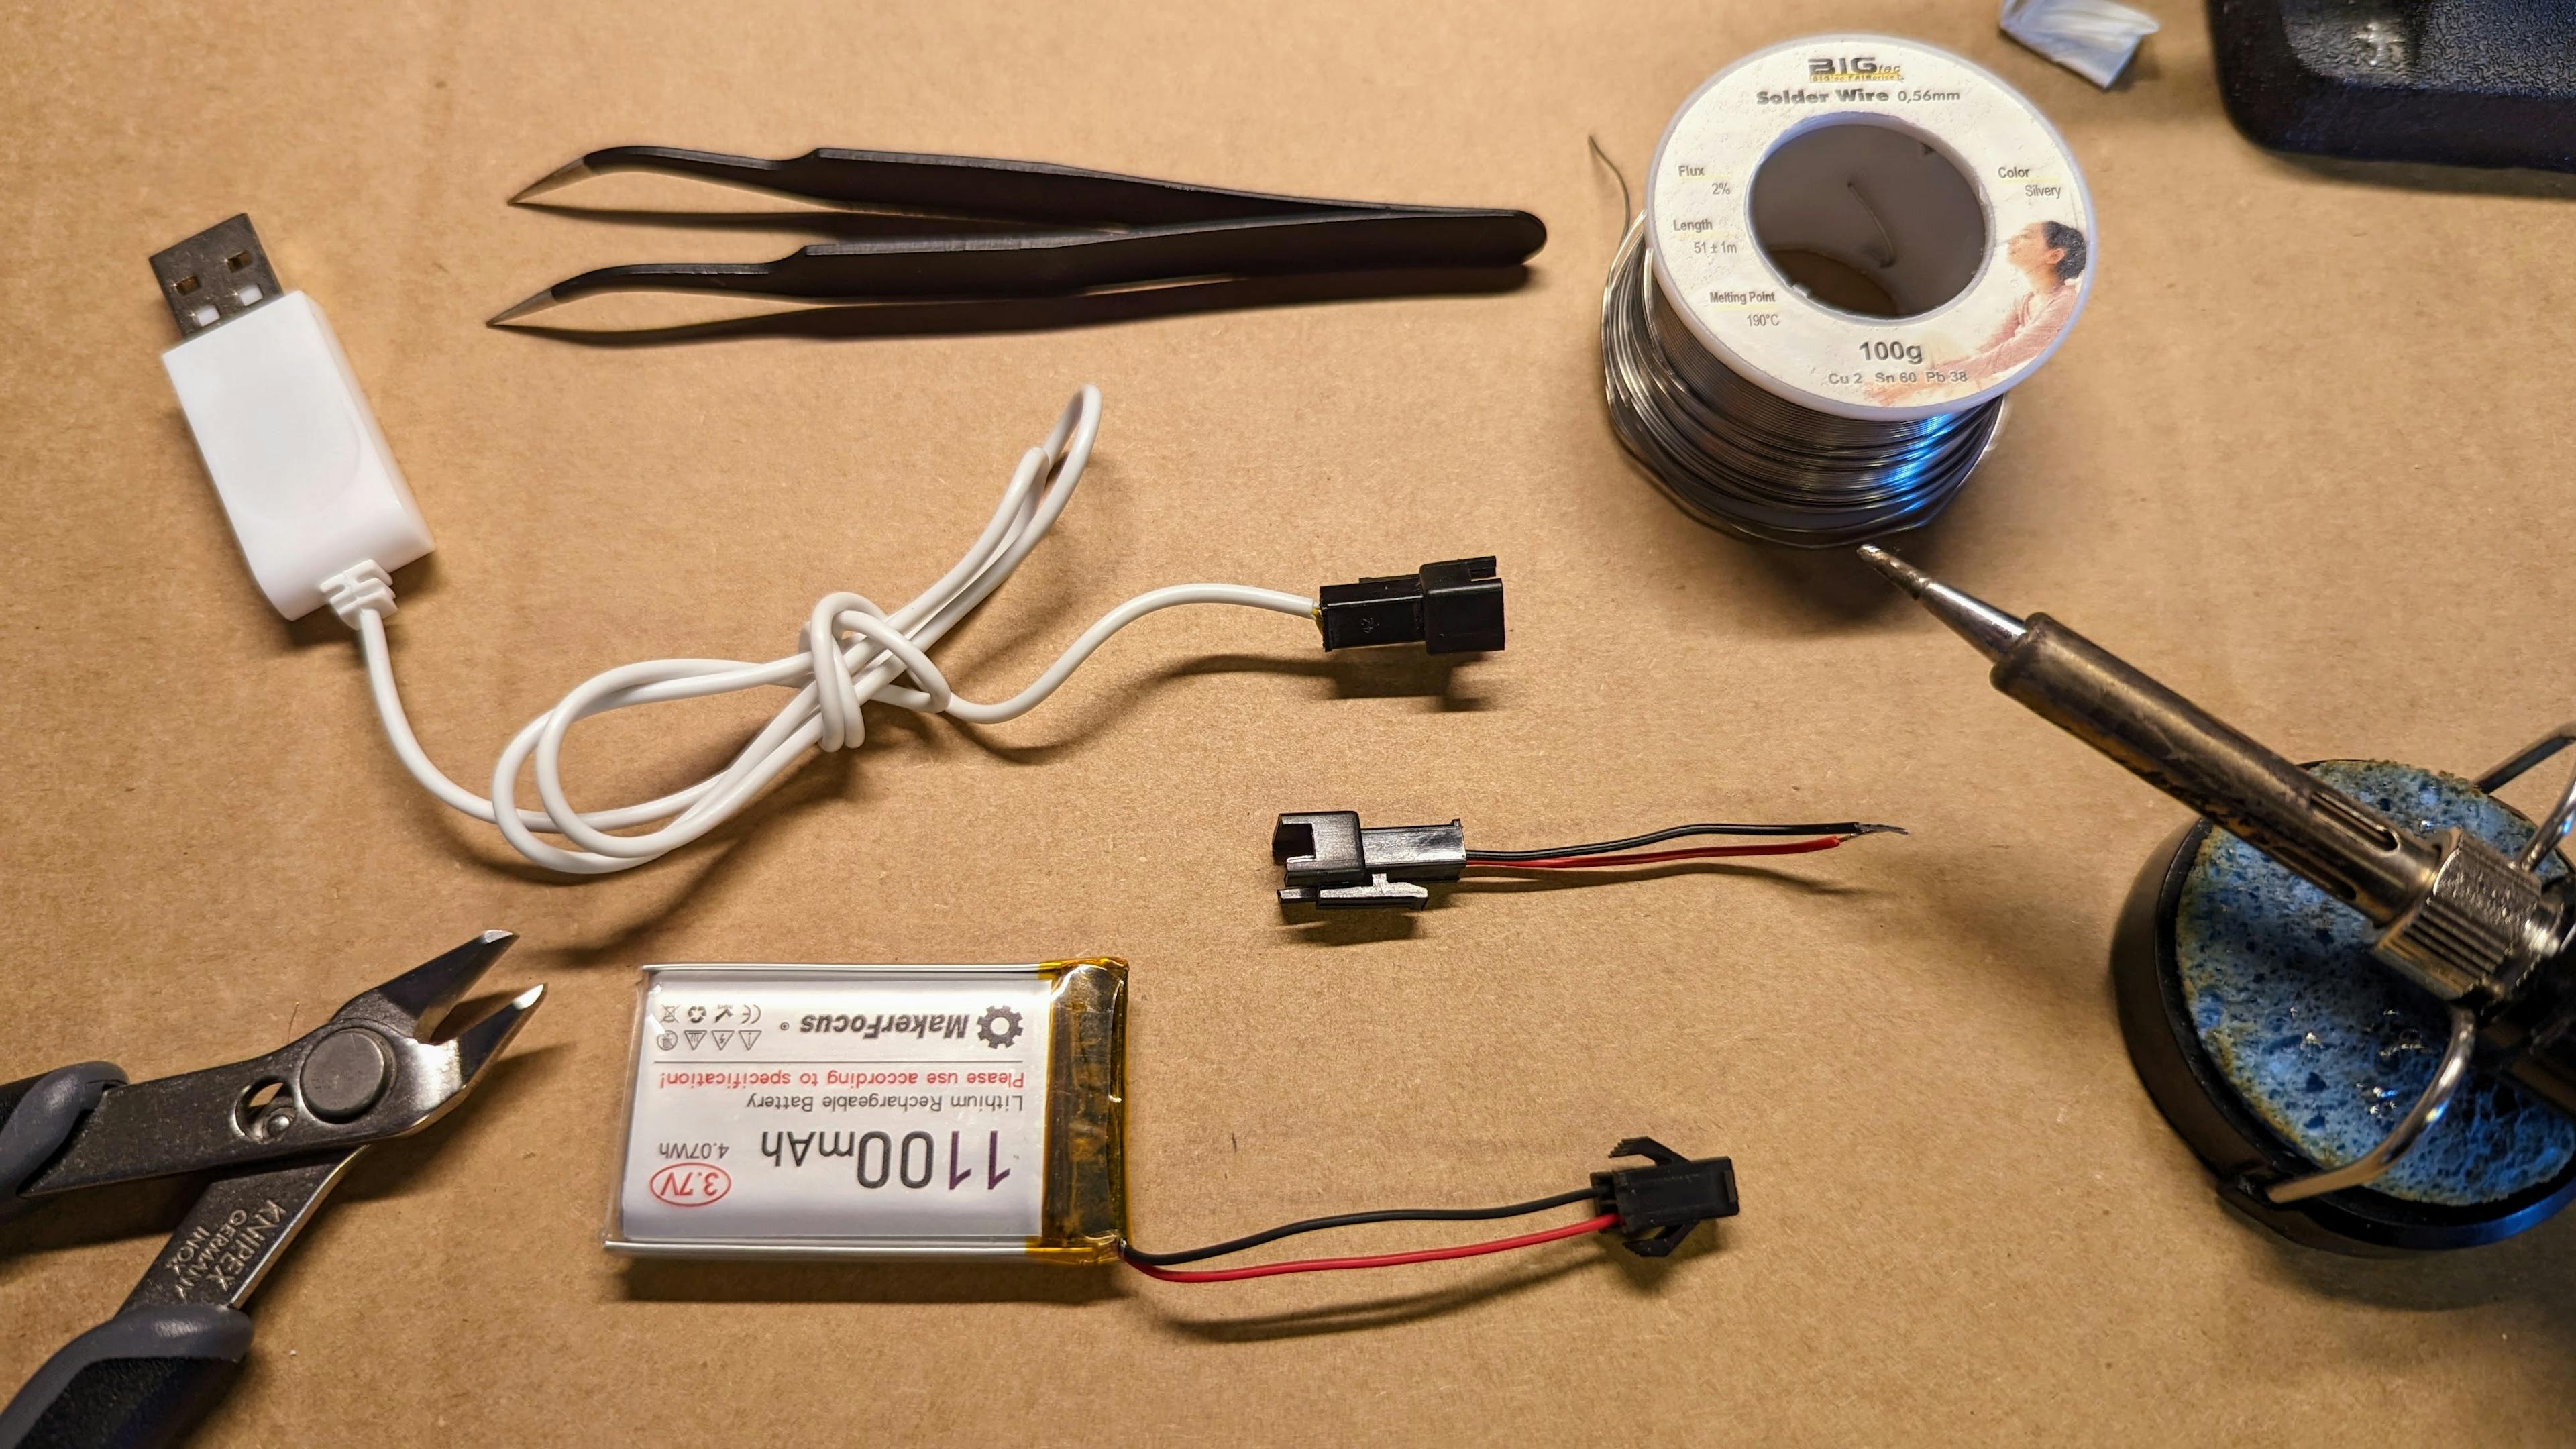 Soldered battery parts